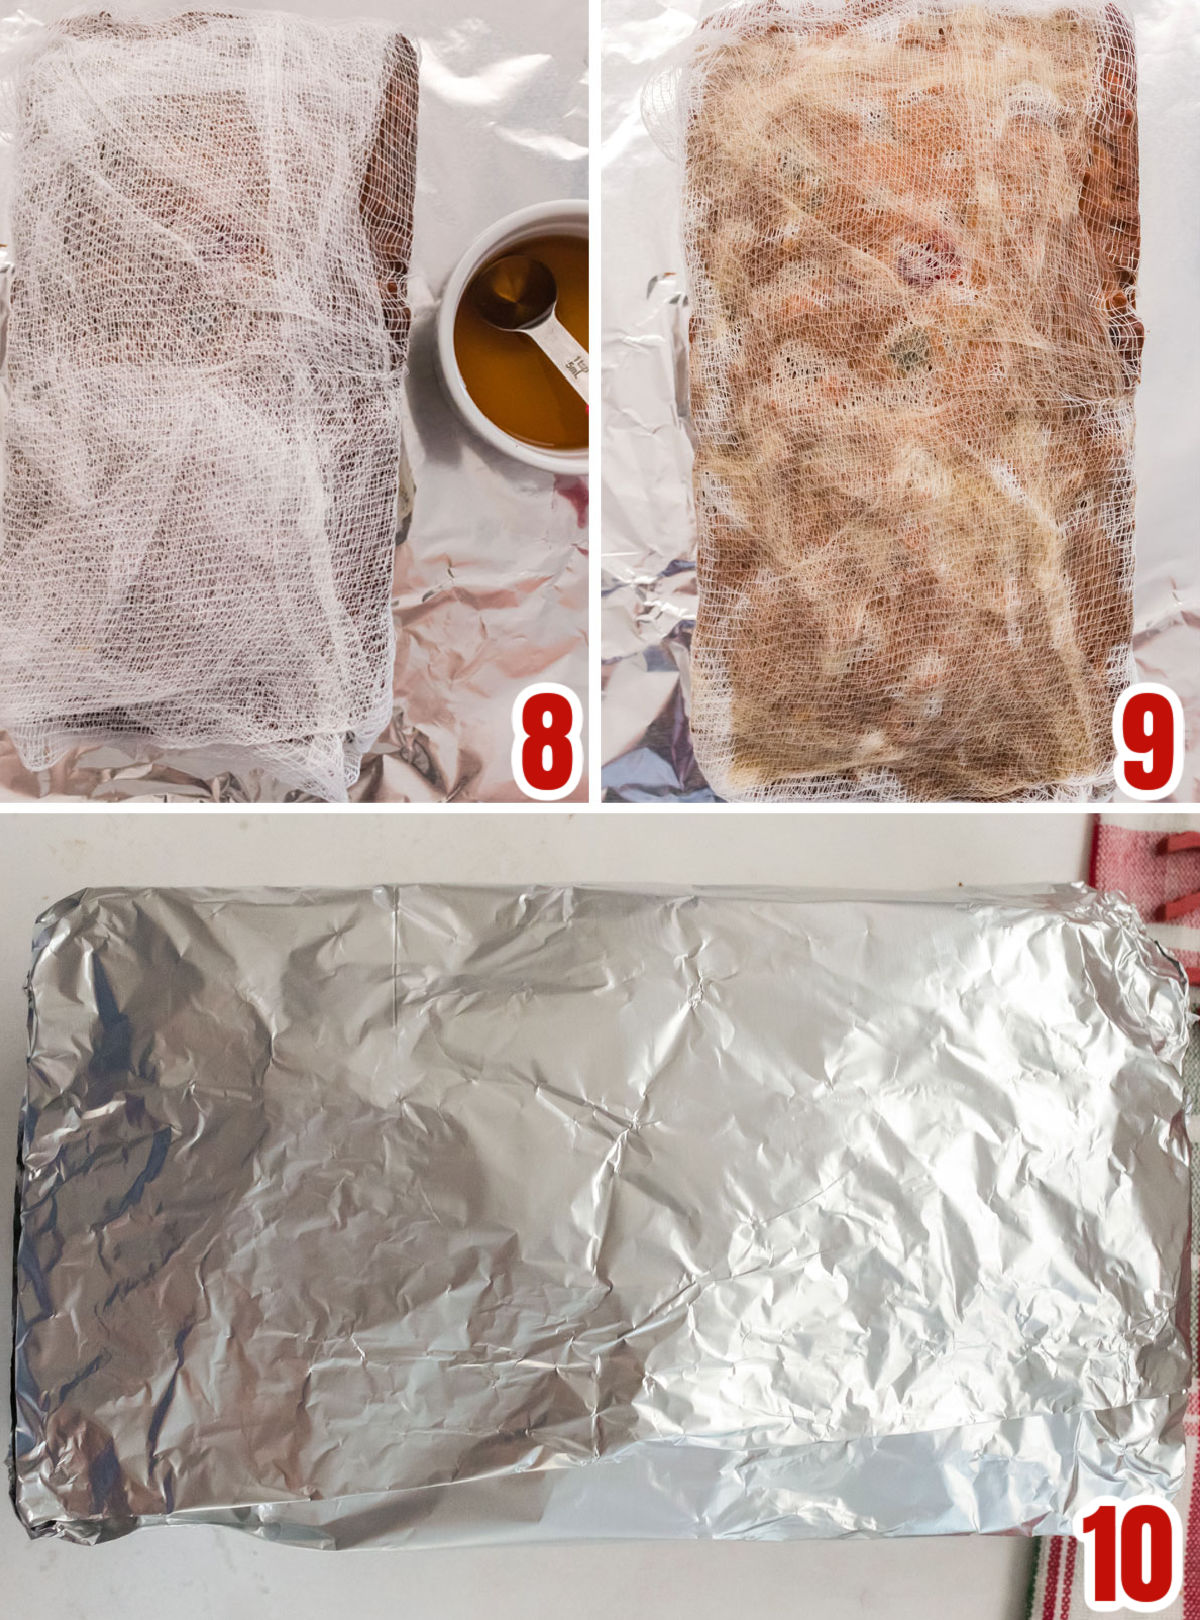 Collage image showing how to ripen the Fruit Cake using cheesecloth and alcohol.